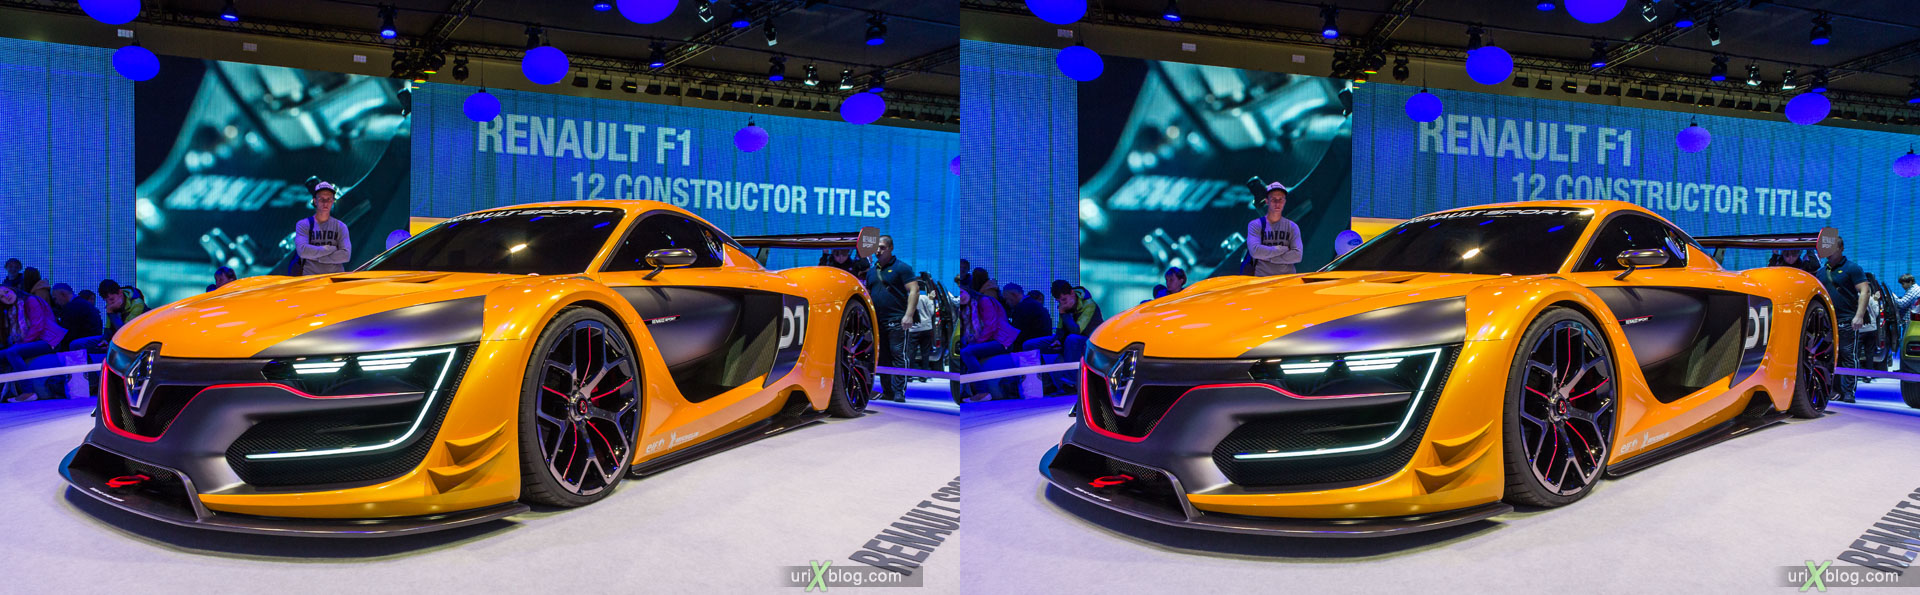 Renault R.S.01, Moscow International Automobile Salon 2014, MIAS 2014, girls, models, Crocus Expo, Moscow, Russia, 3D, stereo pair, cross-eyed, crossview, cross view stereo pair, stereoscopic, 2014